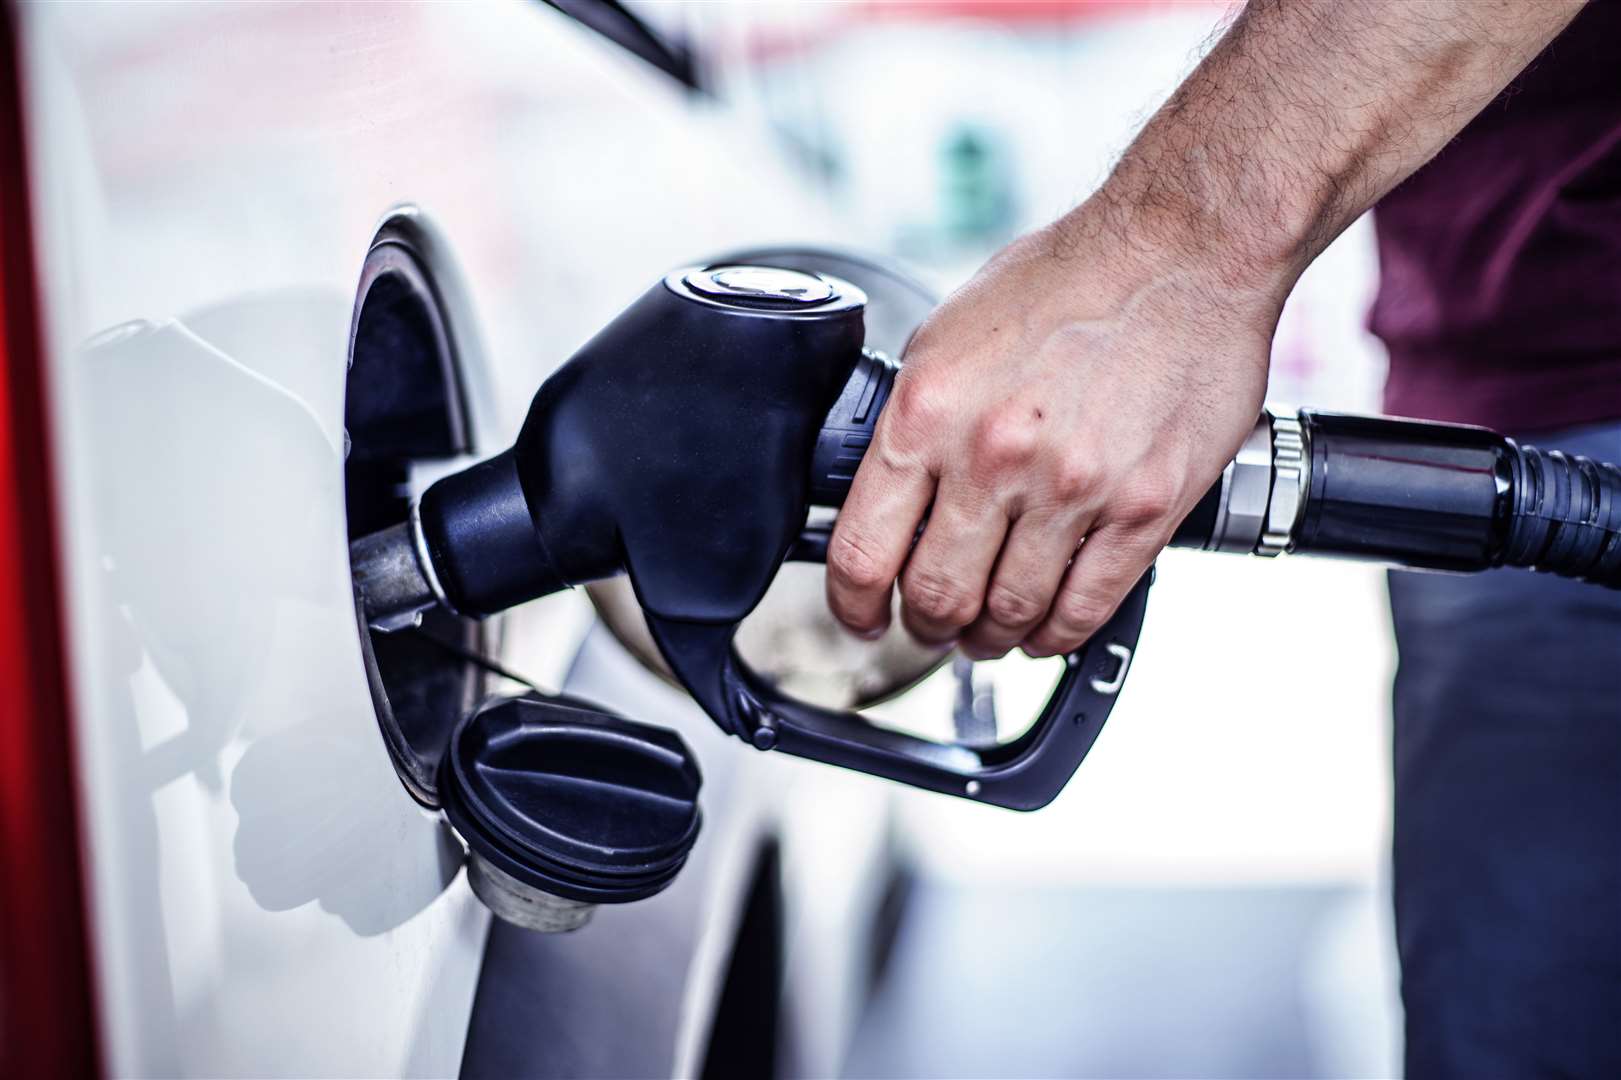 The card could be used for both petrol and diesel. Picture: istock